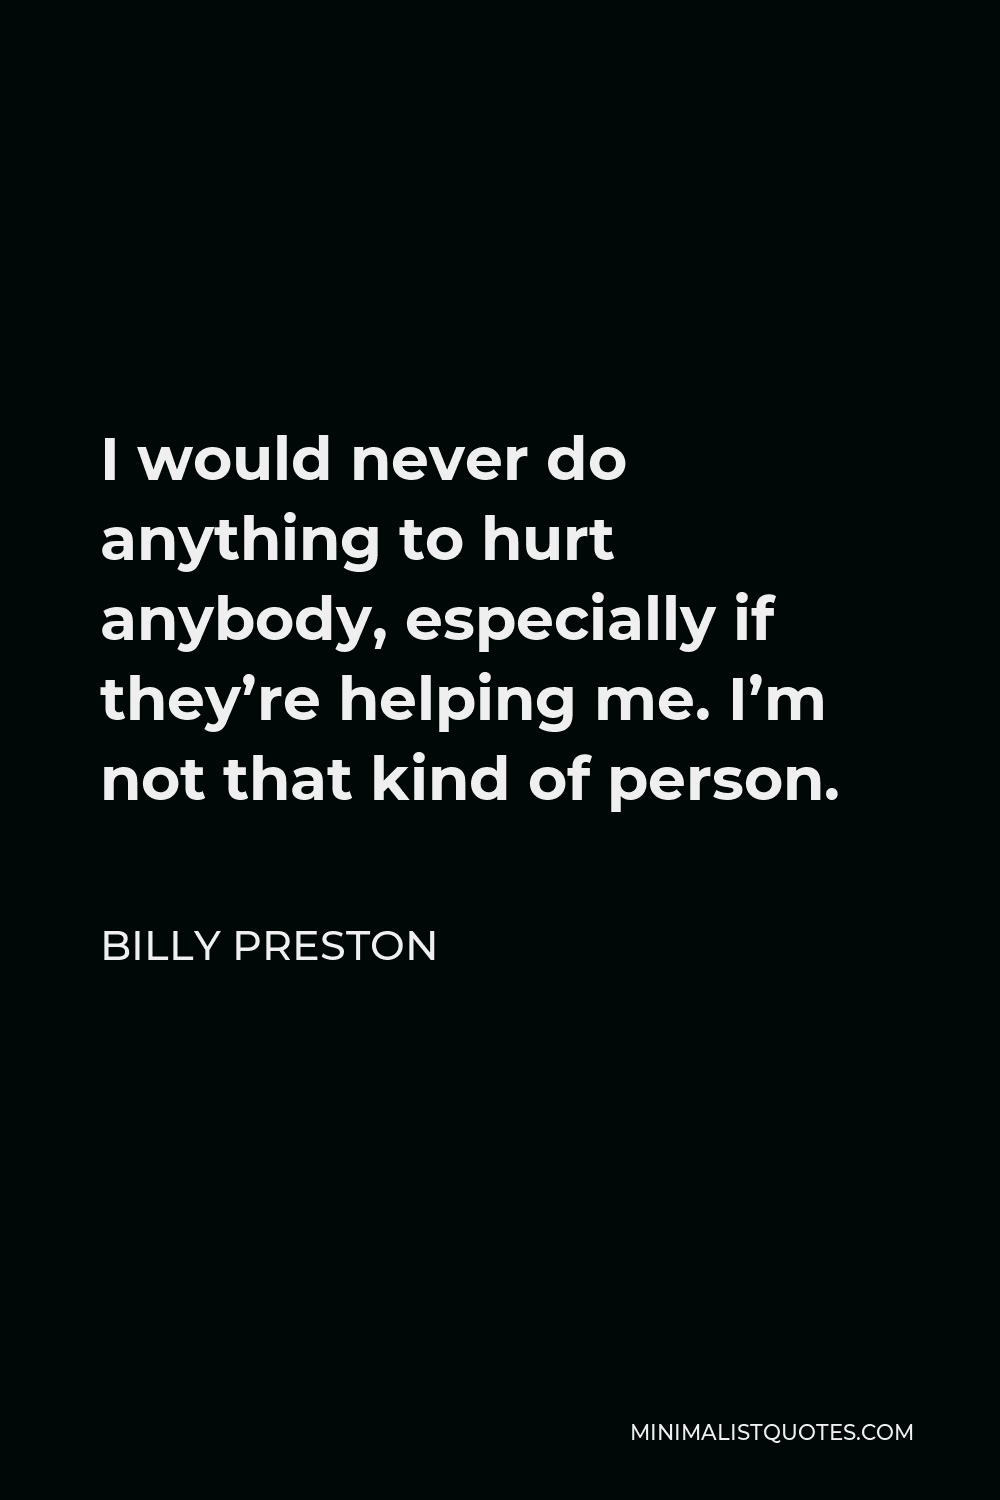 Billy Preston Quote - I would never do anything to hurt anybody, especially if they’re helping me. I’m not that kind of person.